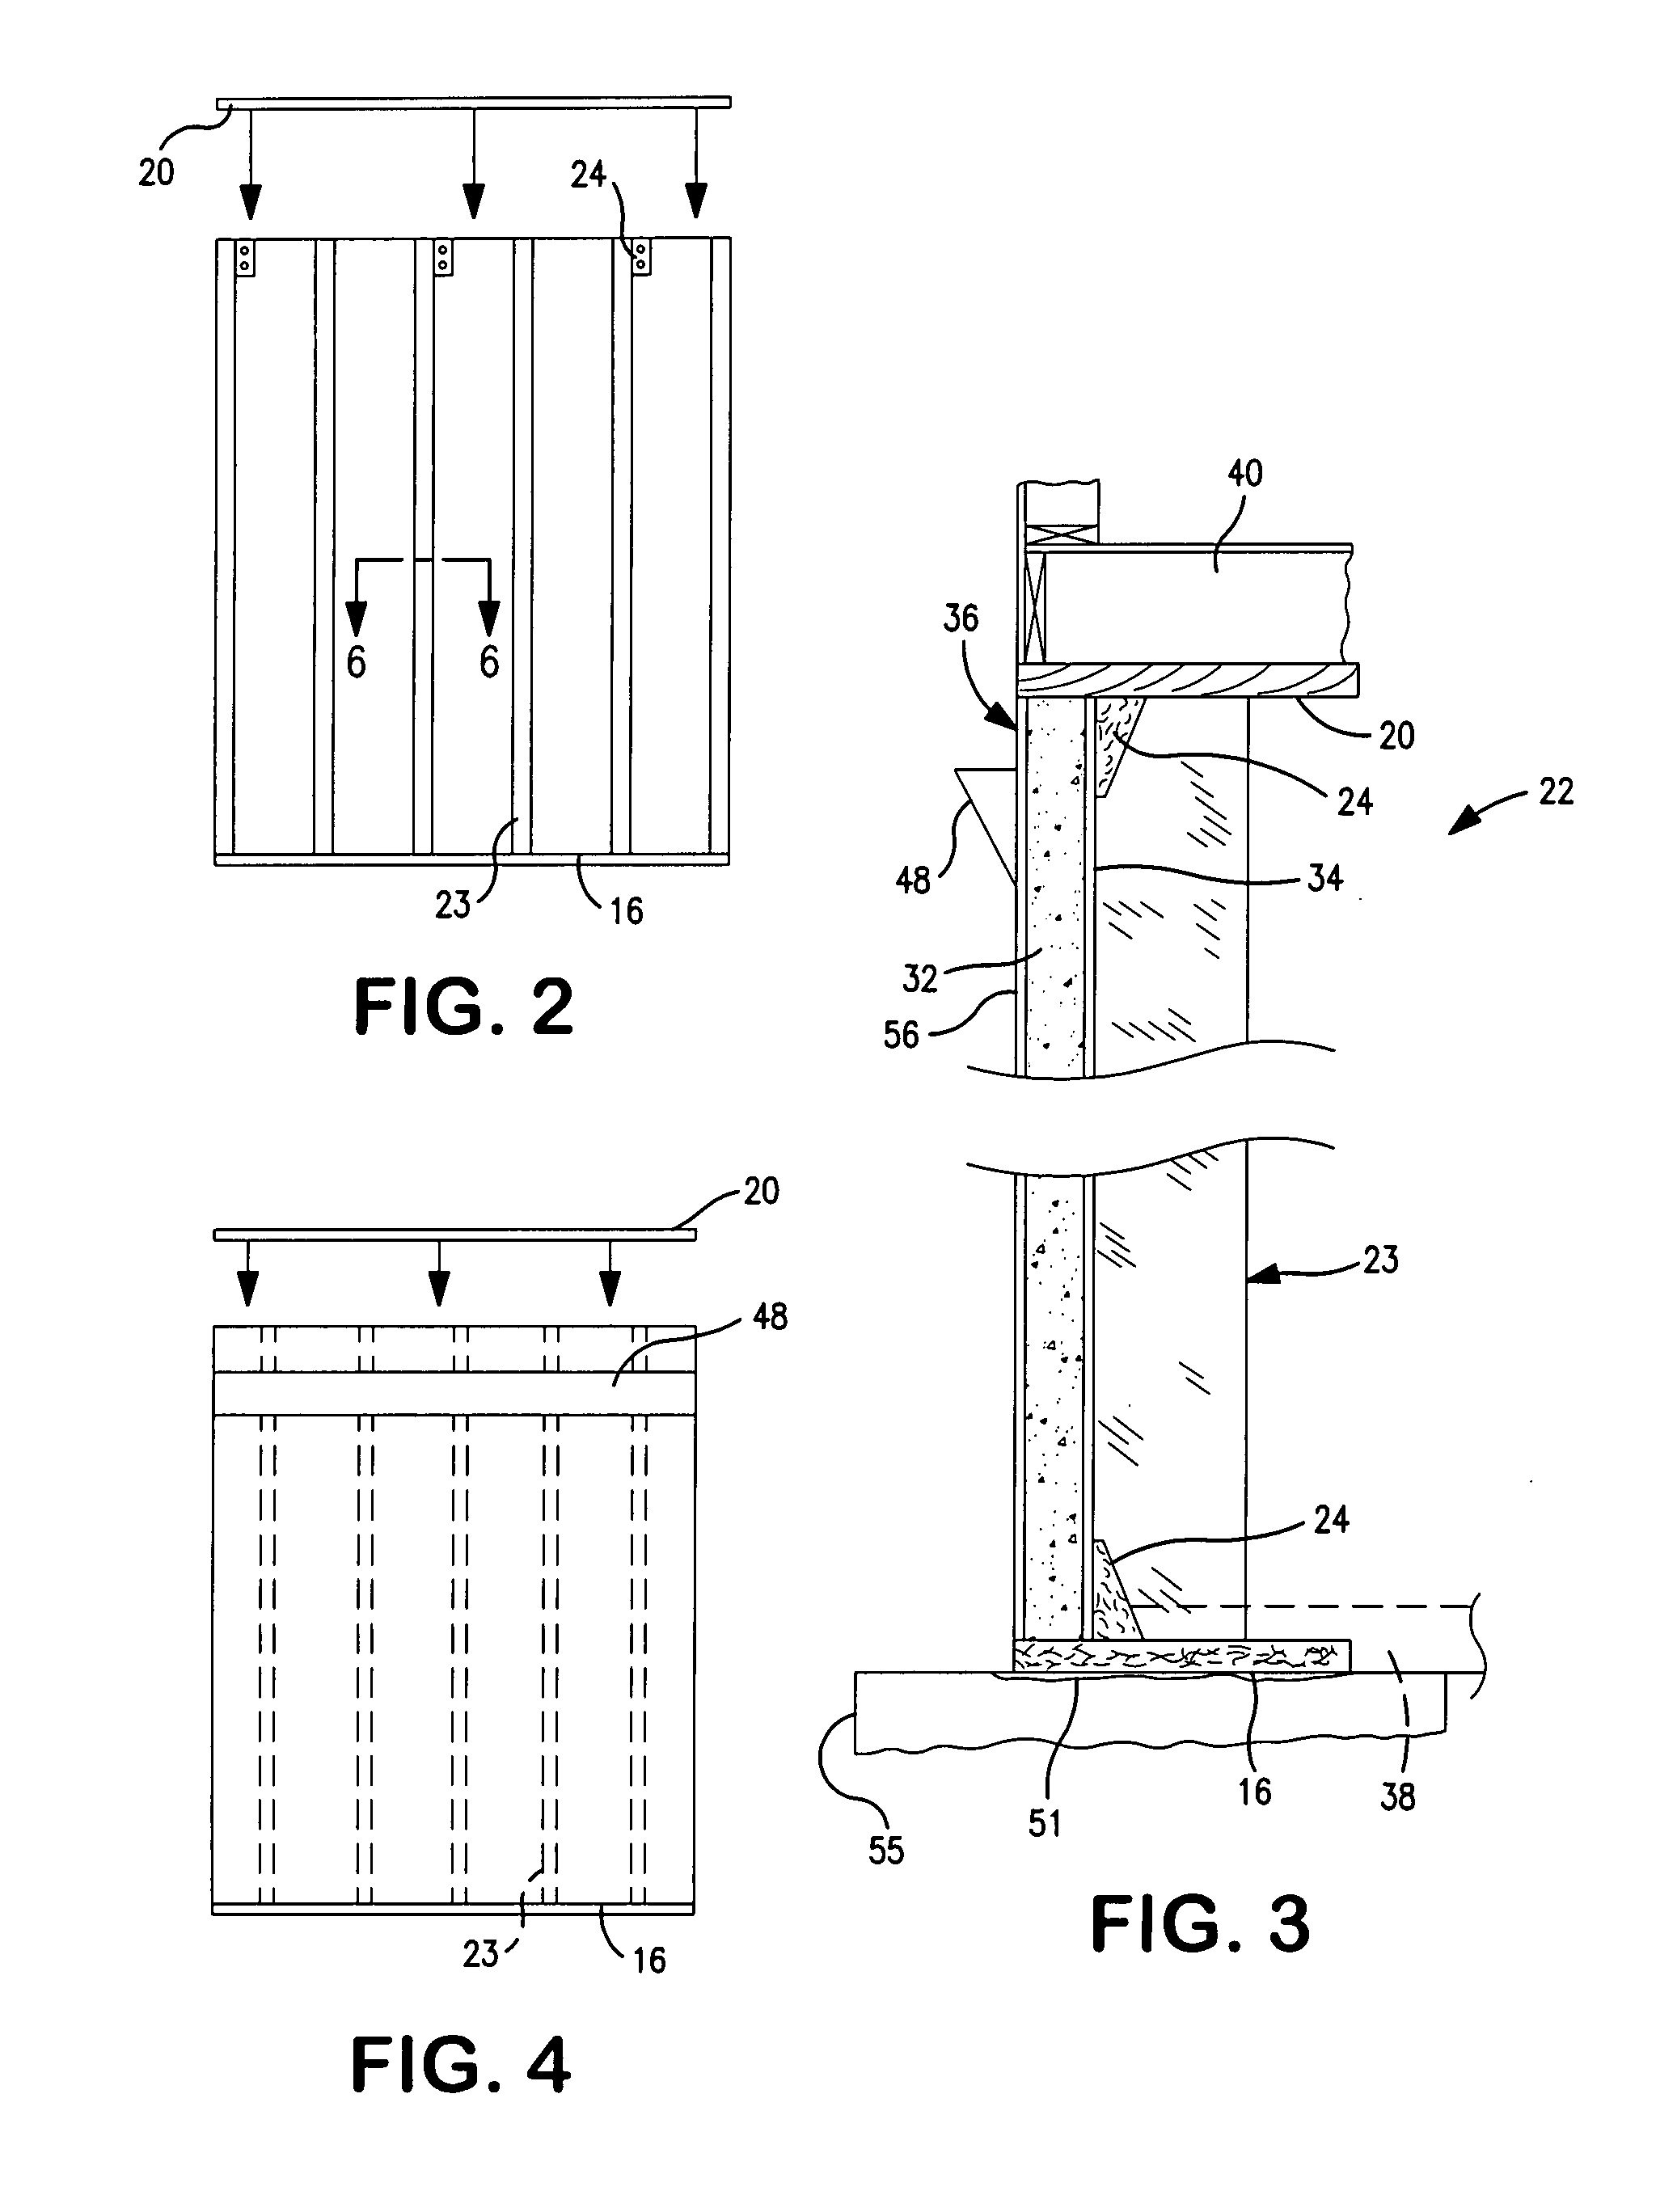 Support pads and support brackets, and structures supported thereby